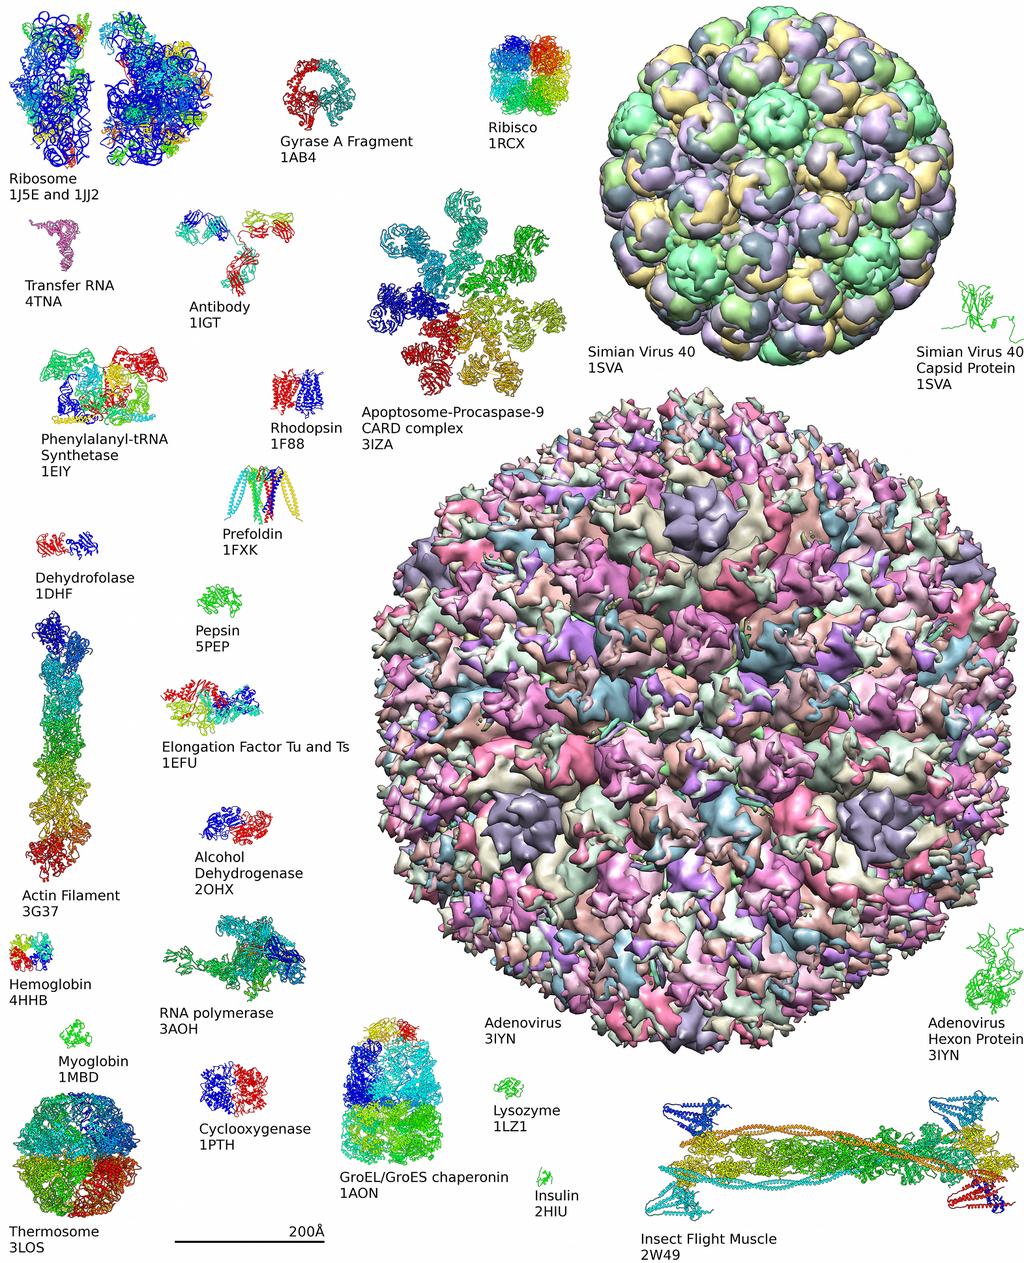 The Protein Data Bank (PDB) Examples of structures from PDB. https://upload.wikimedia.